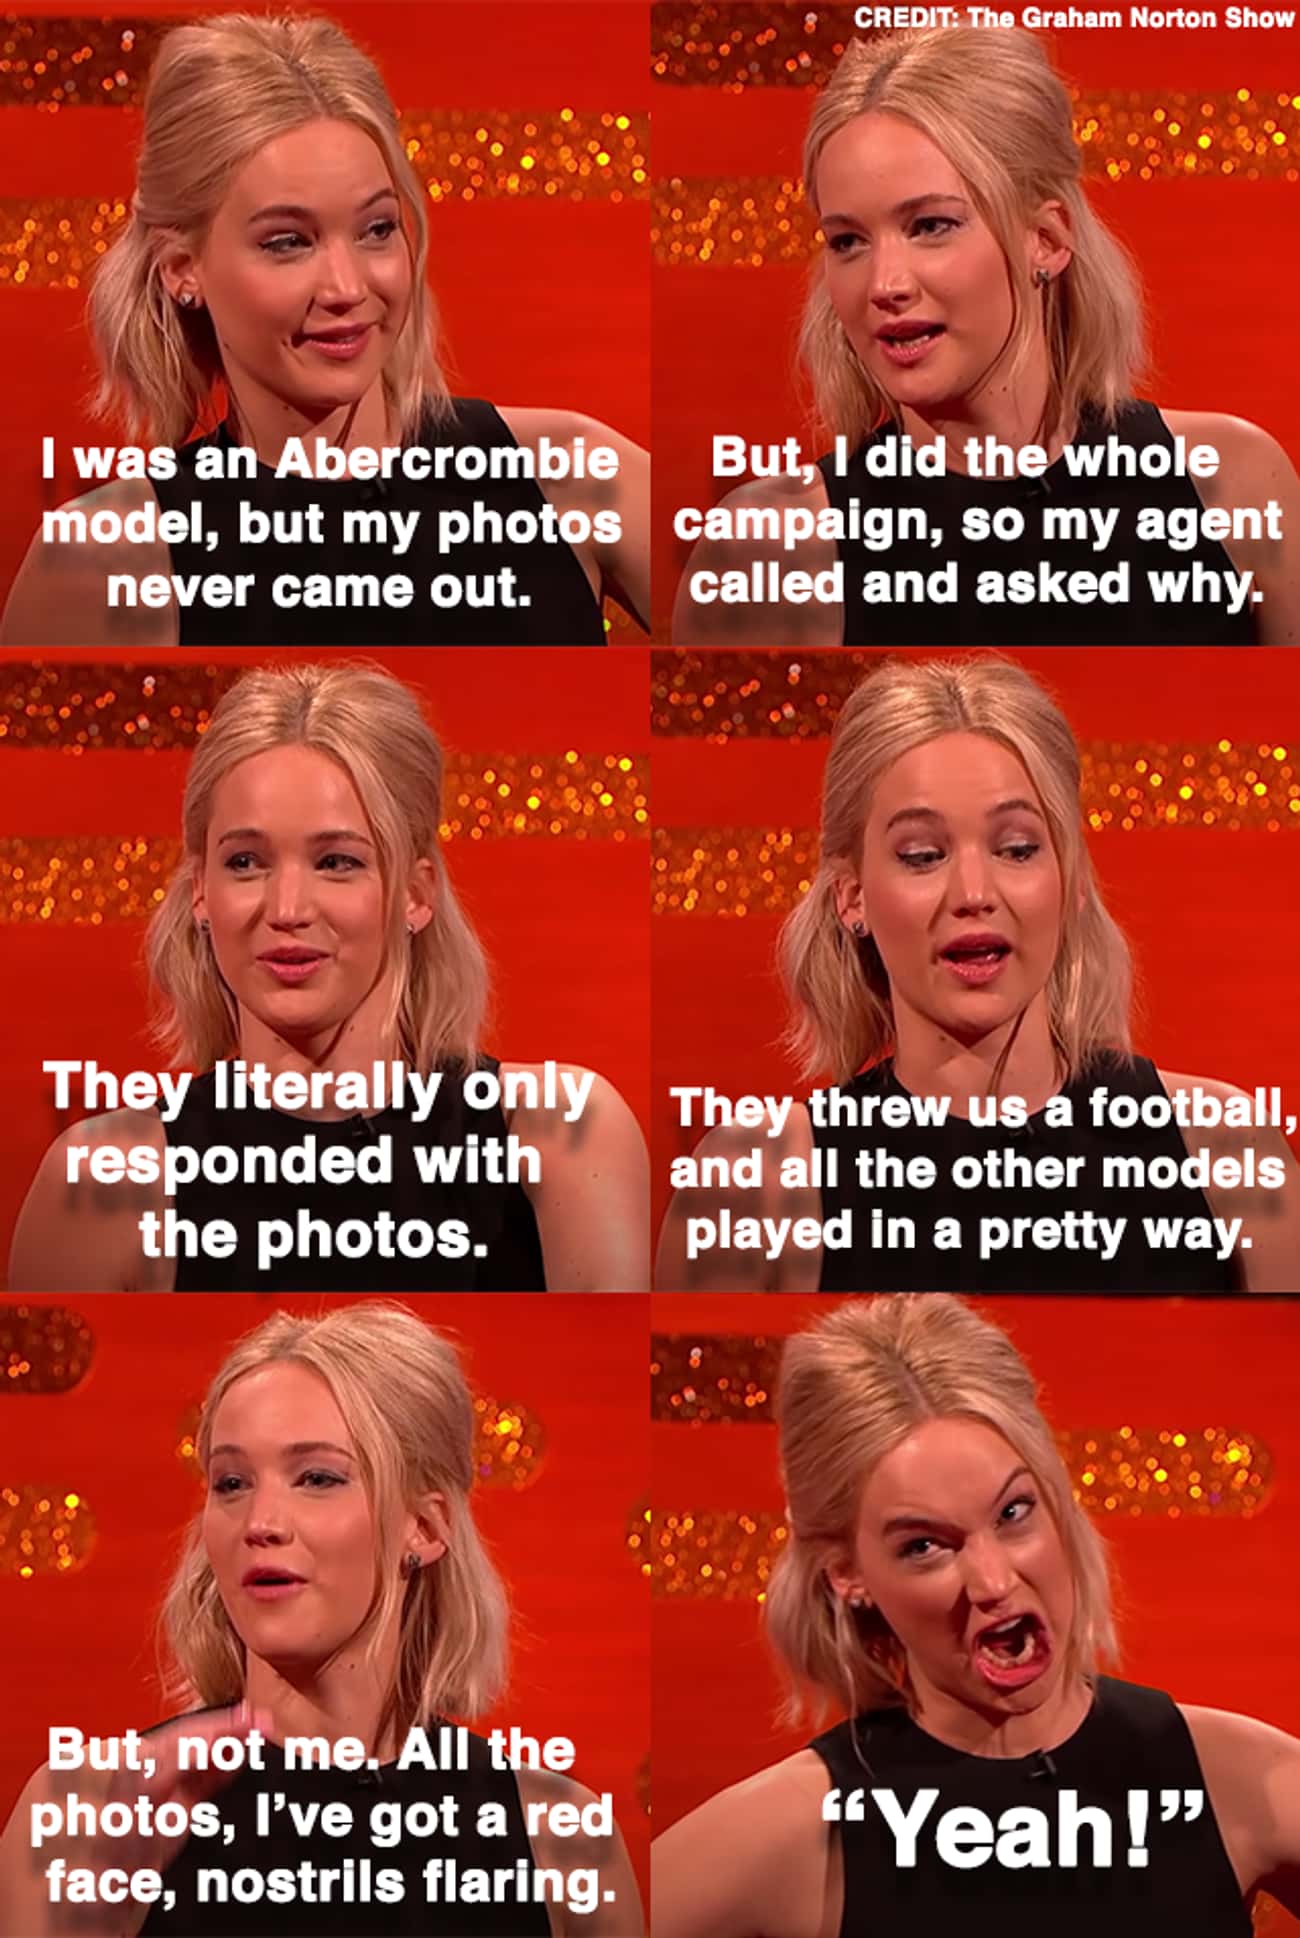 Jennifer Talked About Her Iconic Experience As An Abercrombie Model